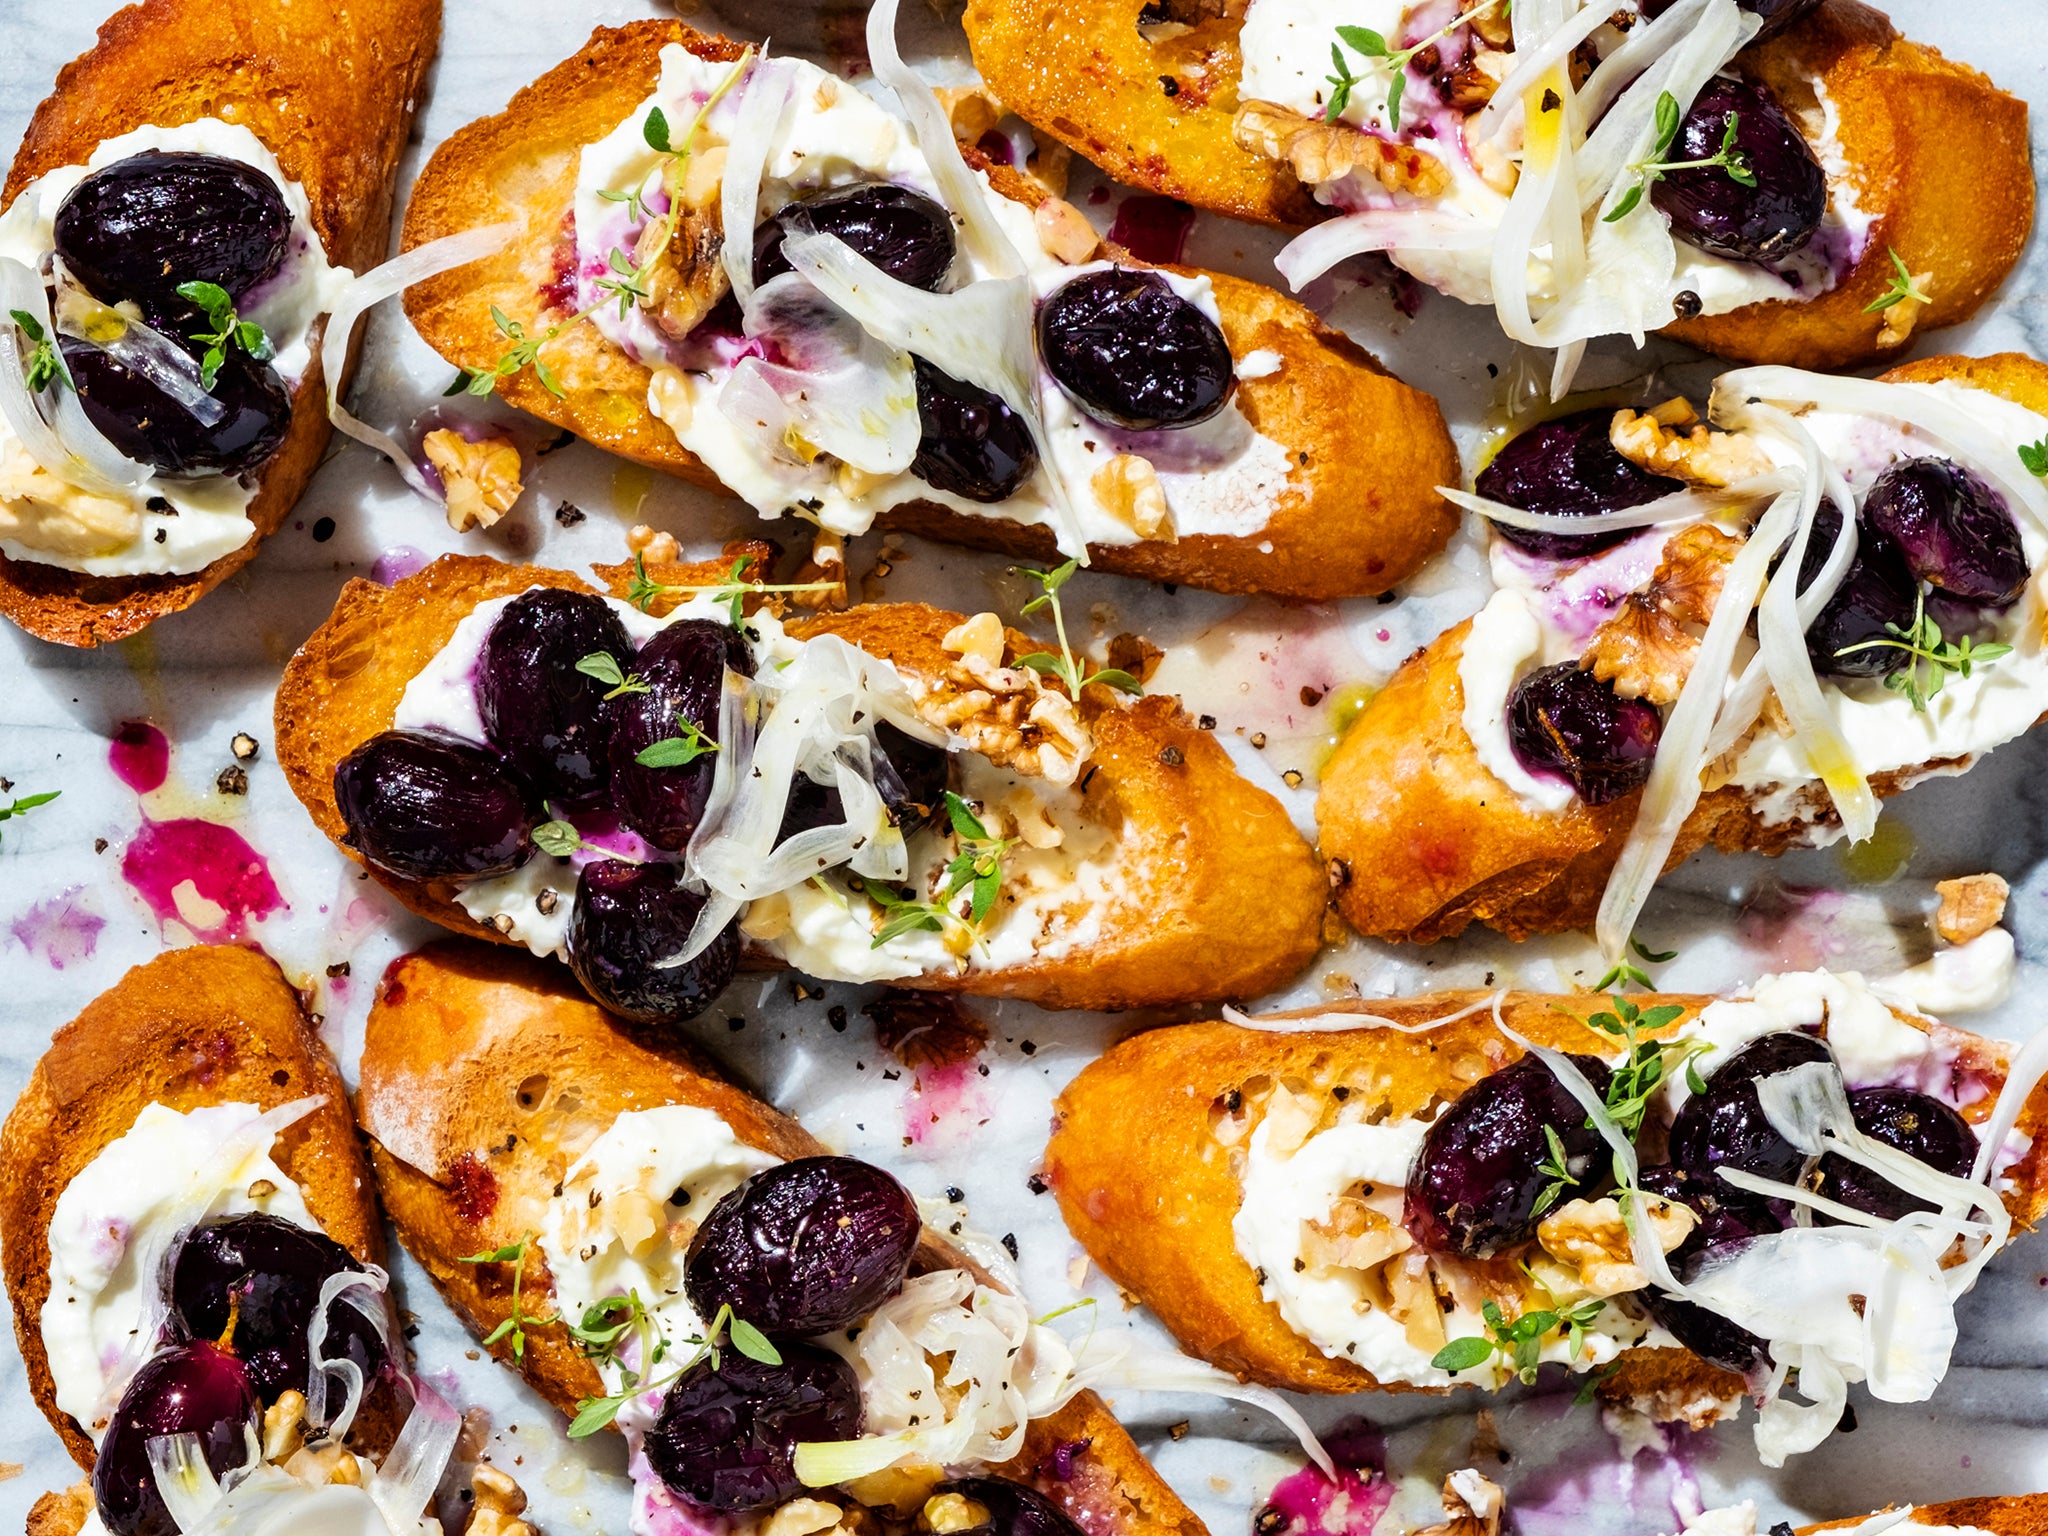 Crispy slices of baguette topped with creamy feta and succulent grapes